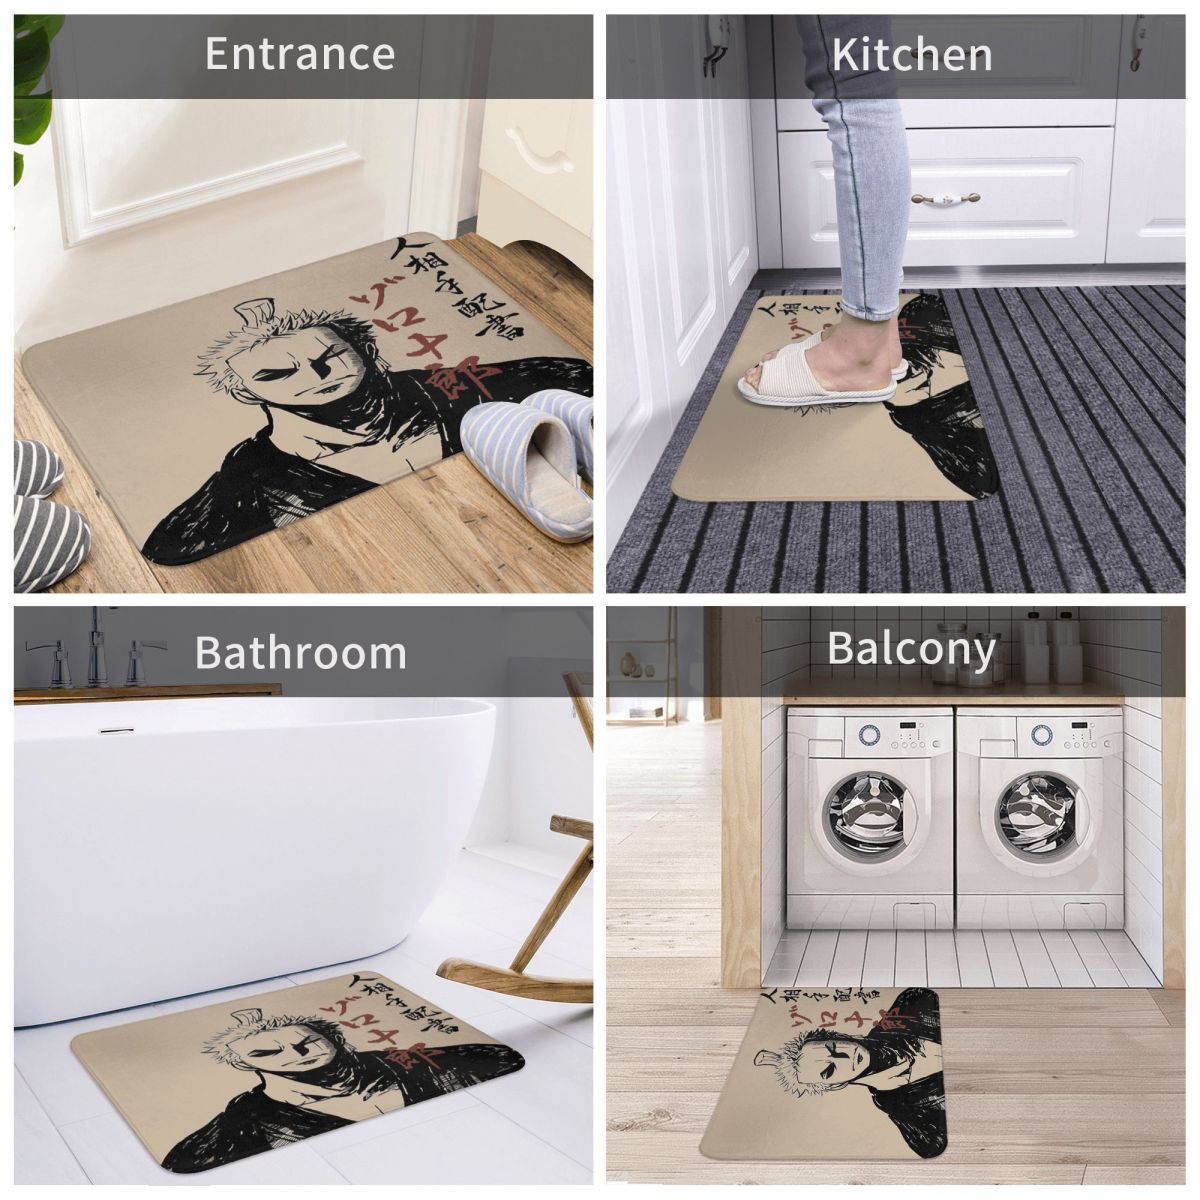 One Piece Monkey D Luffy Anime Bath Mat My Favorite Character In The OP Universe! Doormat Kitchen Carpet Entrance Door Rug Home, everythinganimee